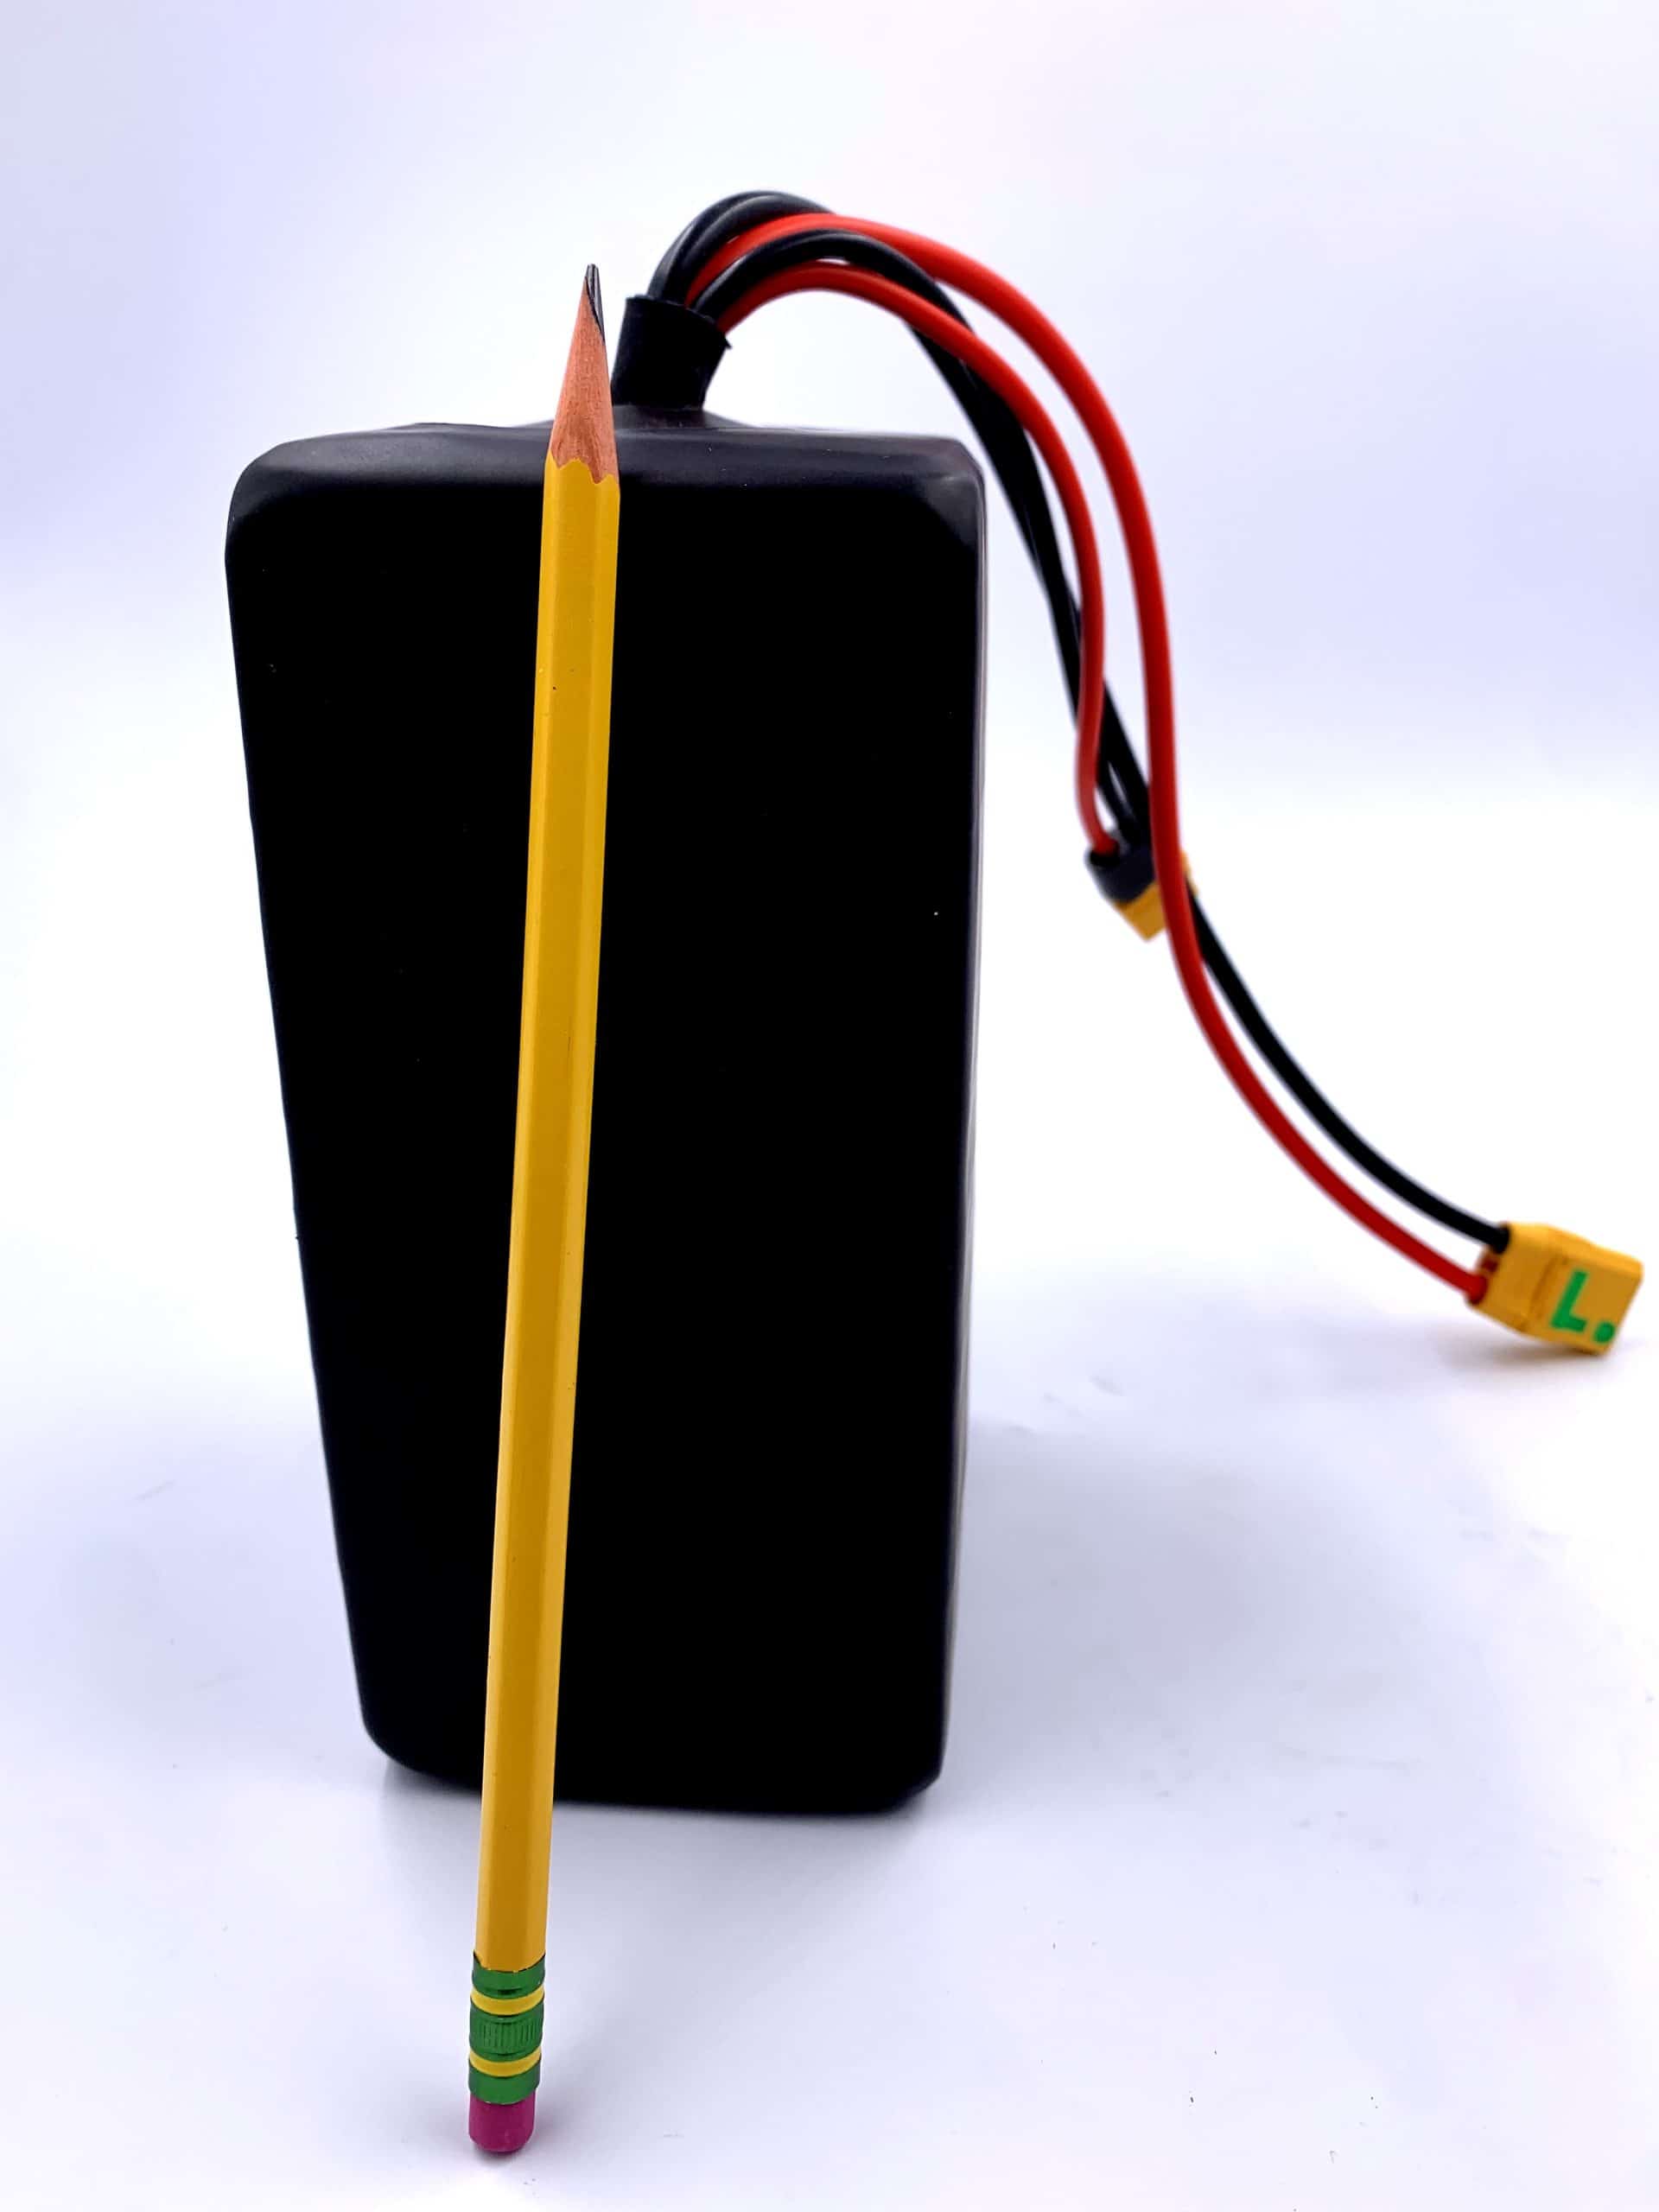 A yellow pencil is next to an electric device.